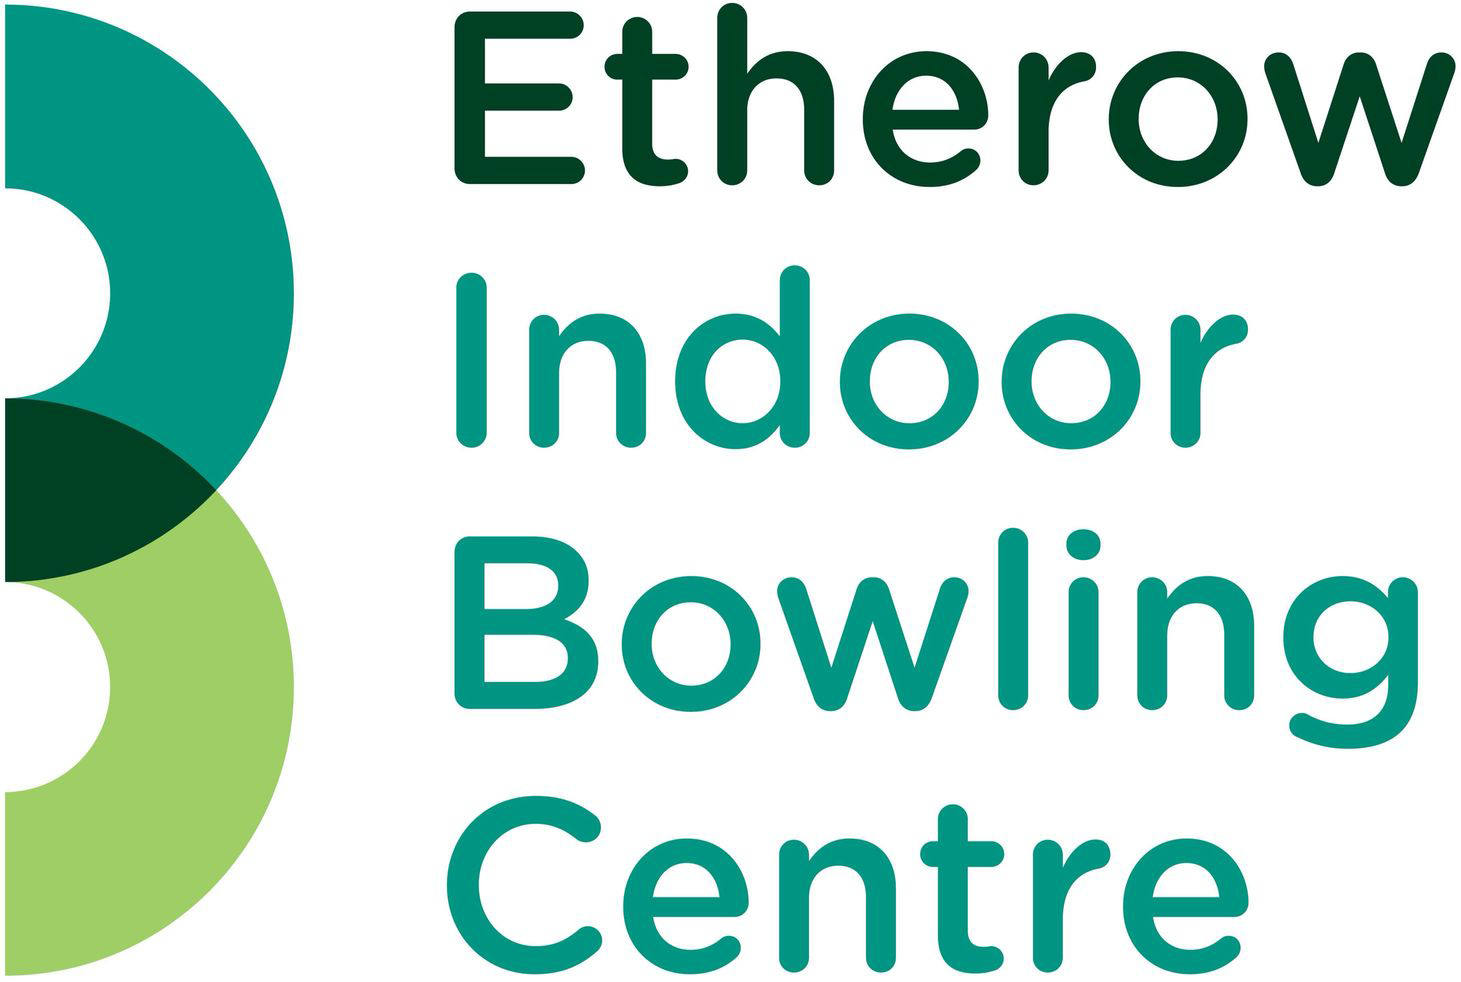 Etherow Indoor Bowling Centre